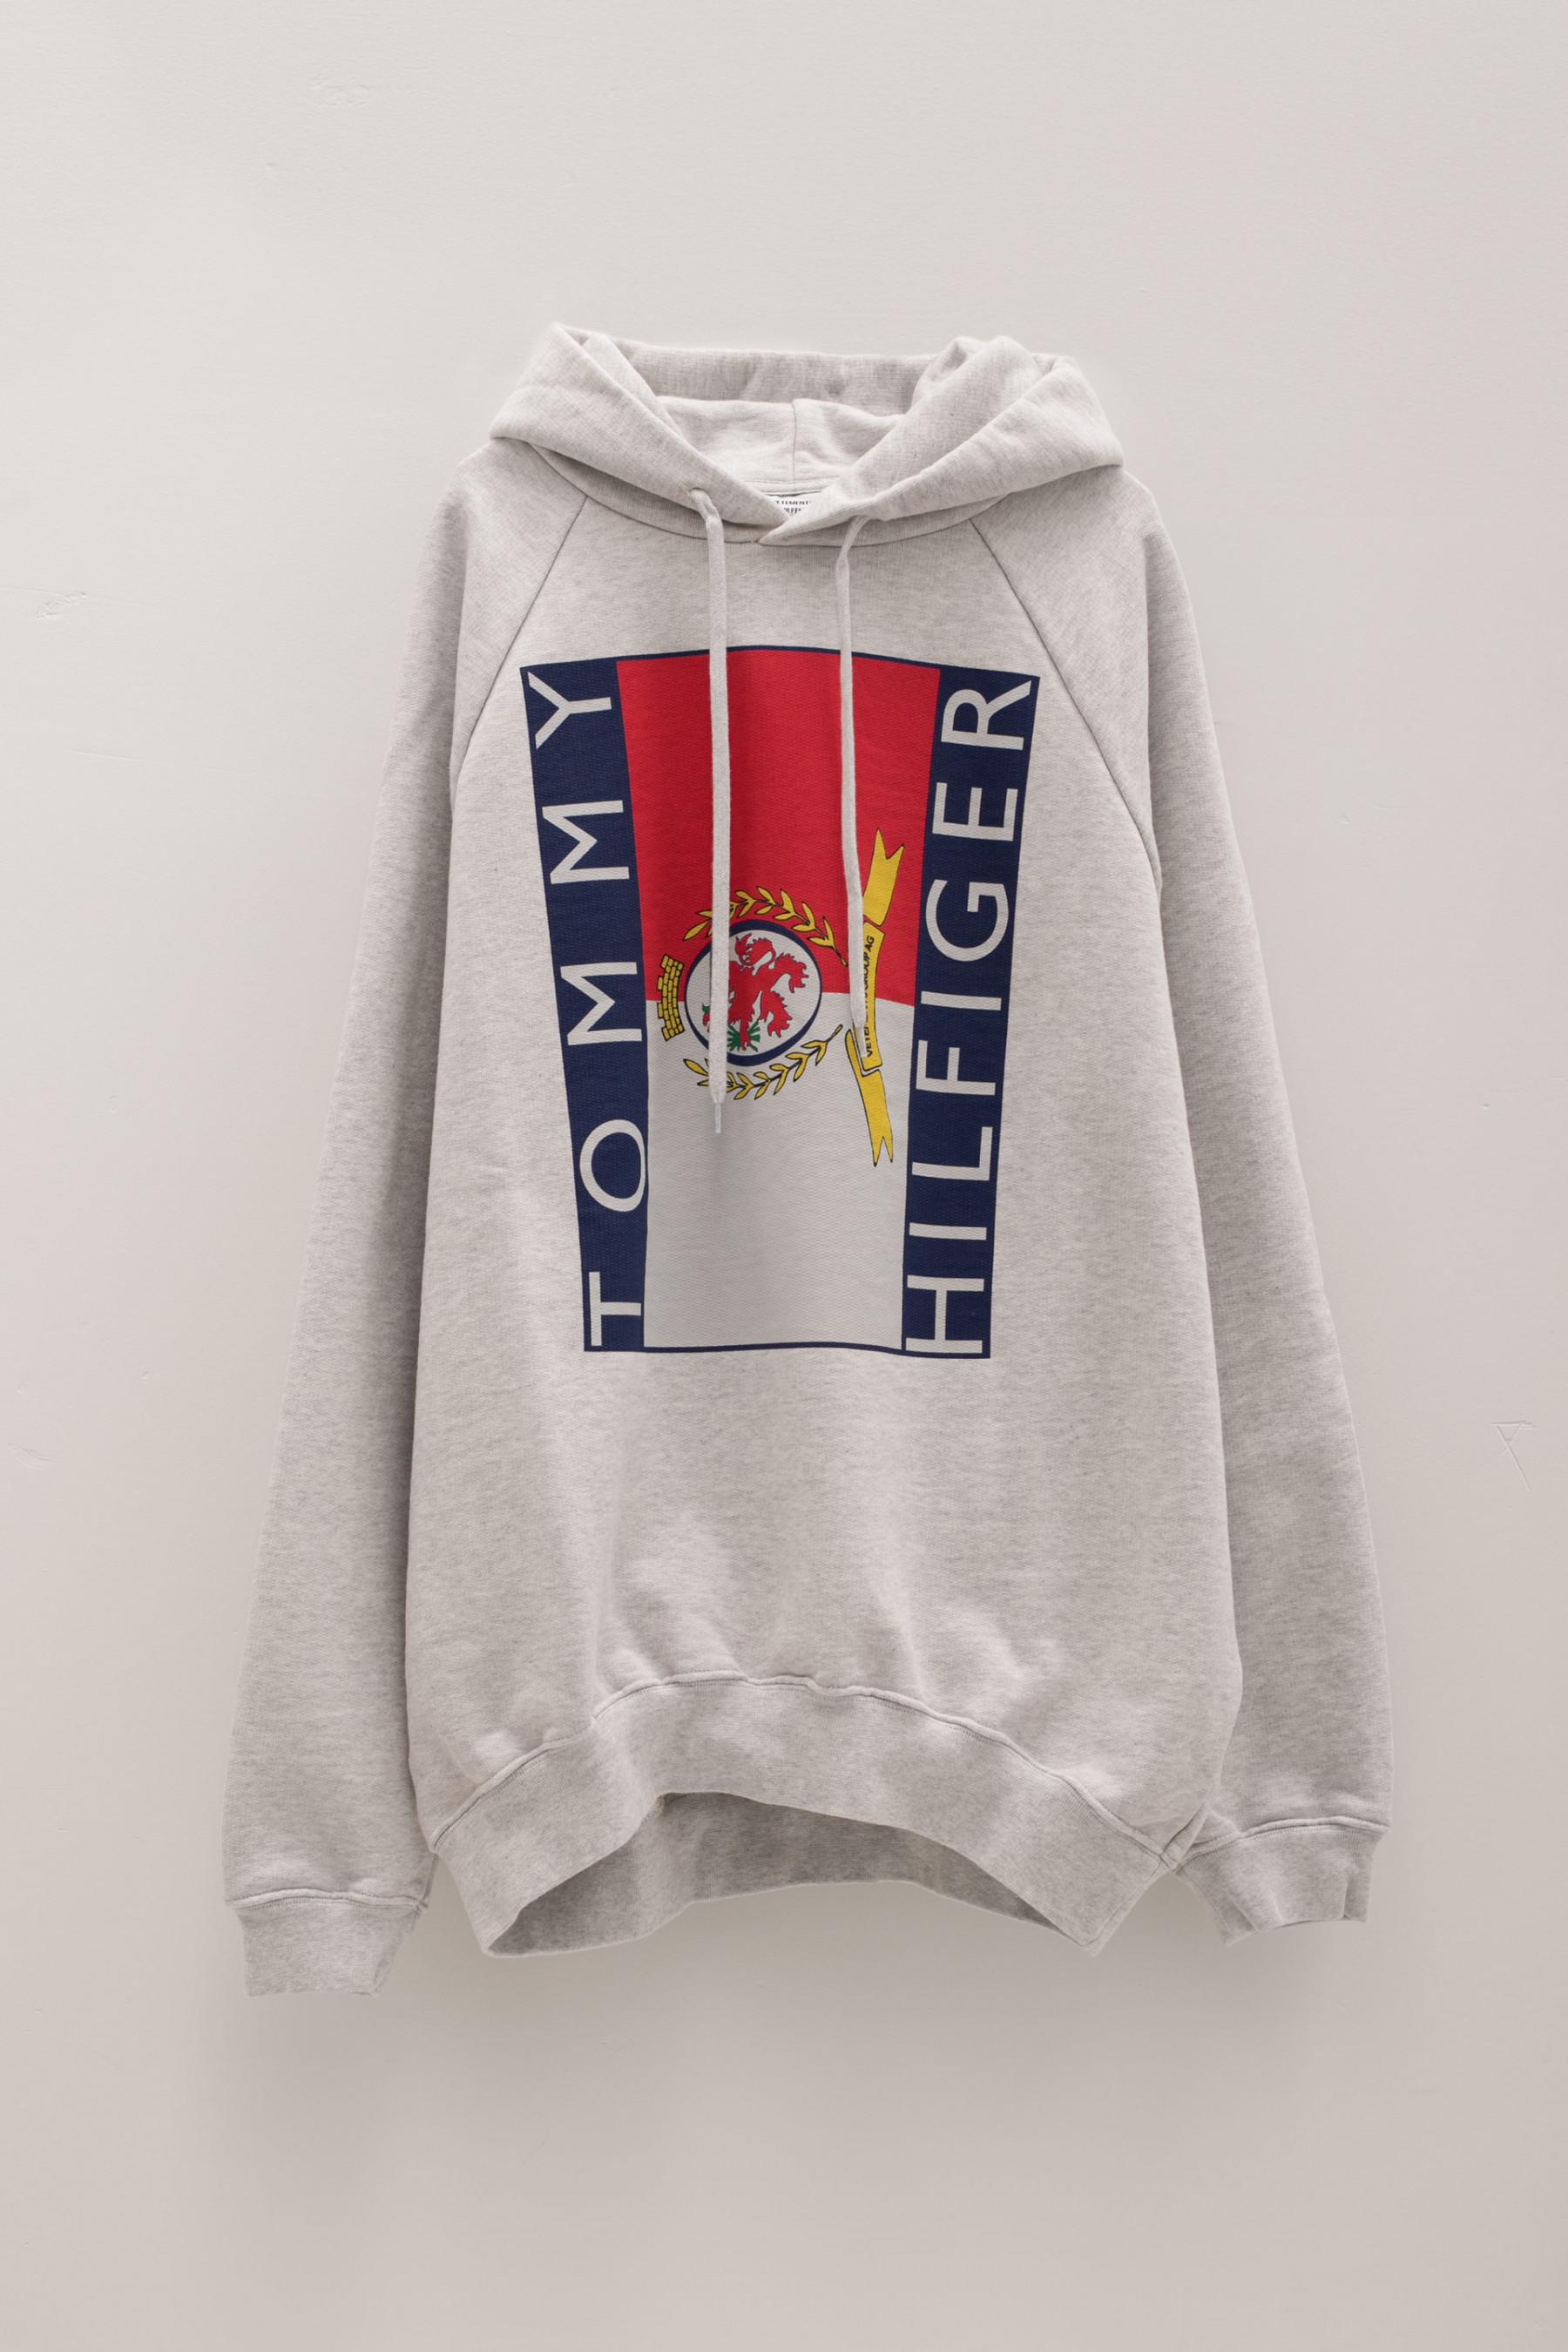 Vetements X Tommy Hilfiger Oversized Hoodie Deals, 55% OFF |  www.smokymountains.org